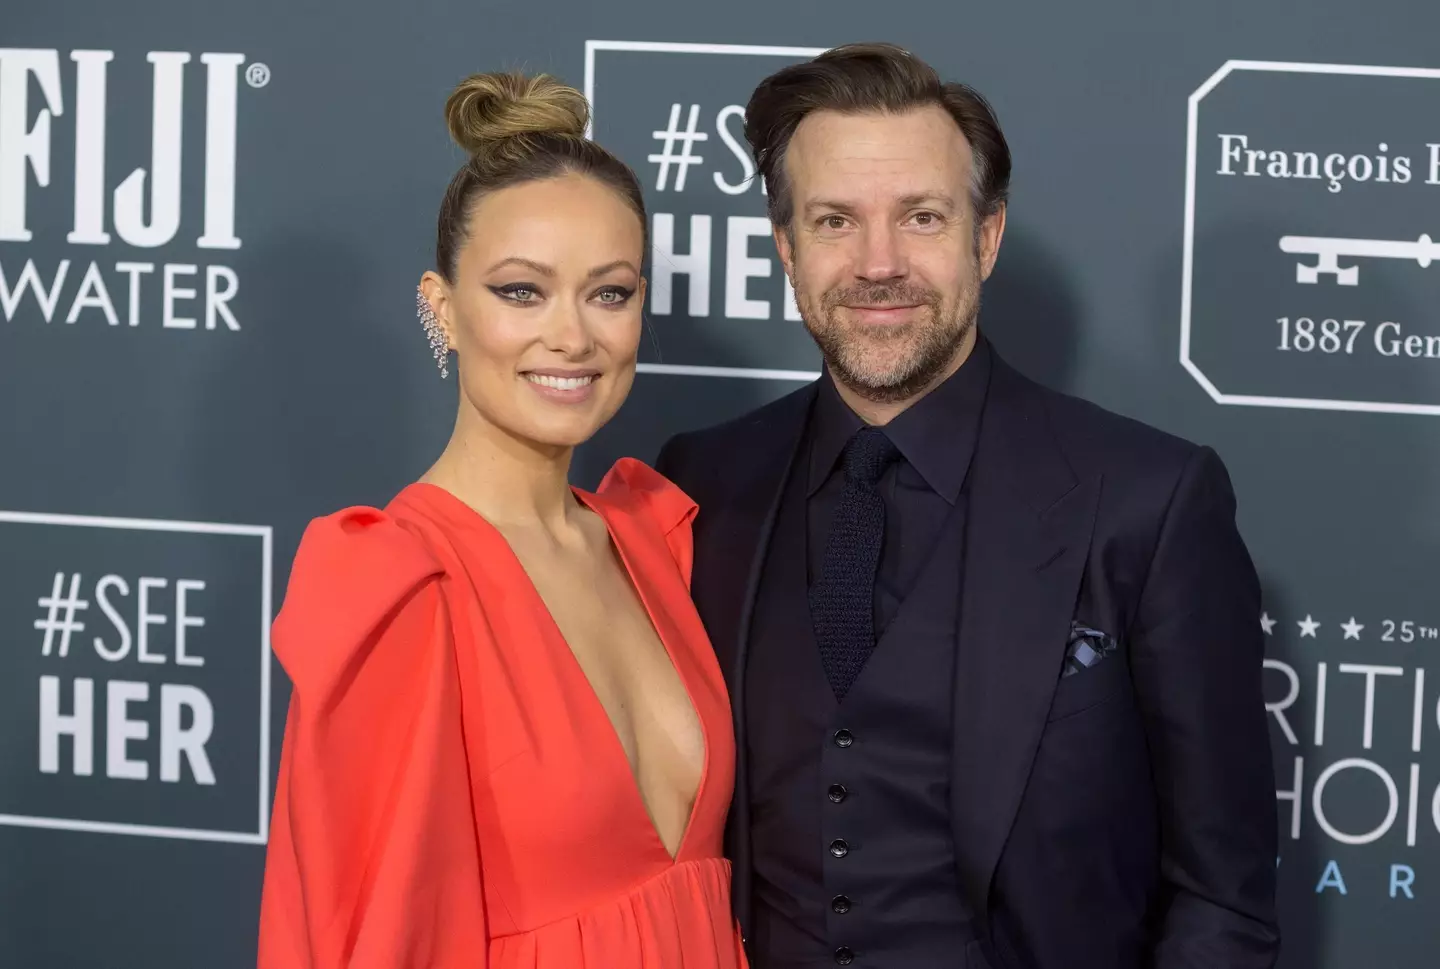 Jason Sudeikis and Olivia Wilde broke up in 2020 and are battling for custody of their children.